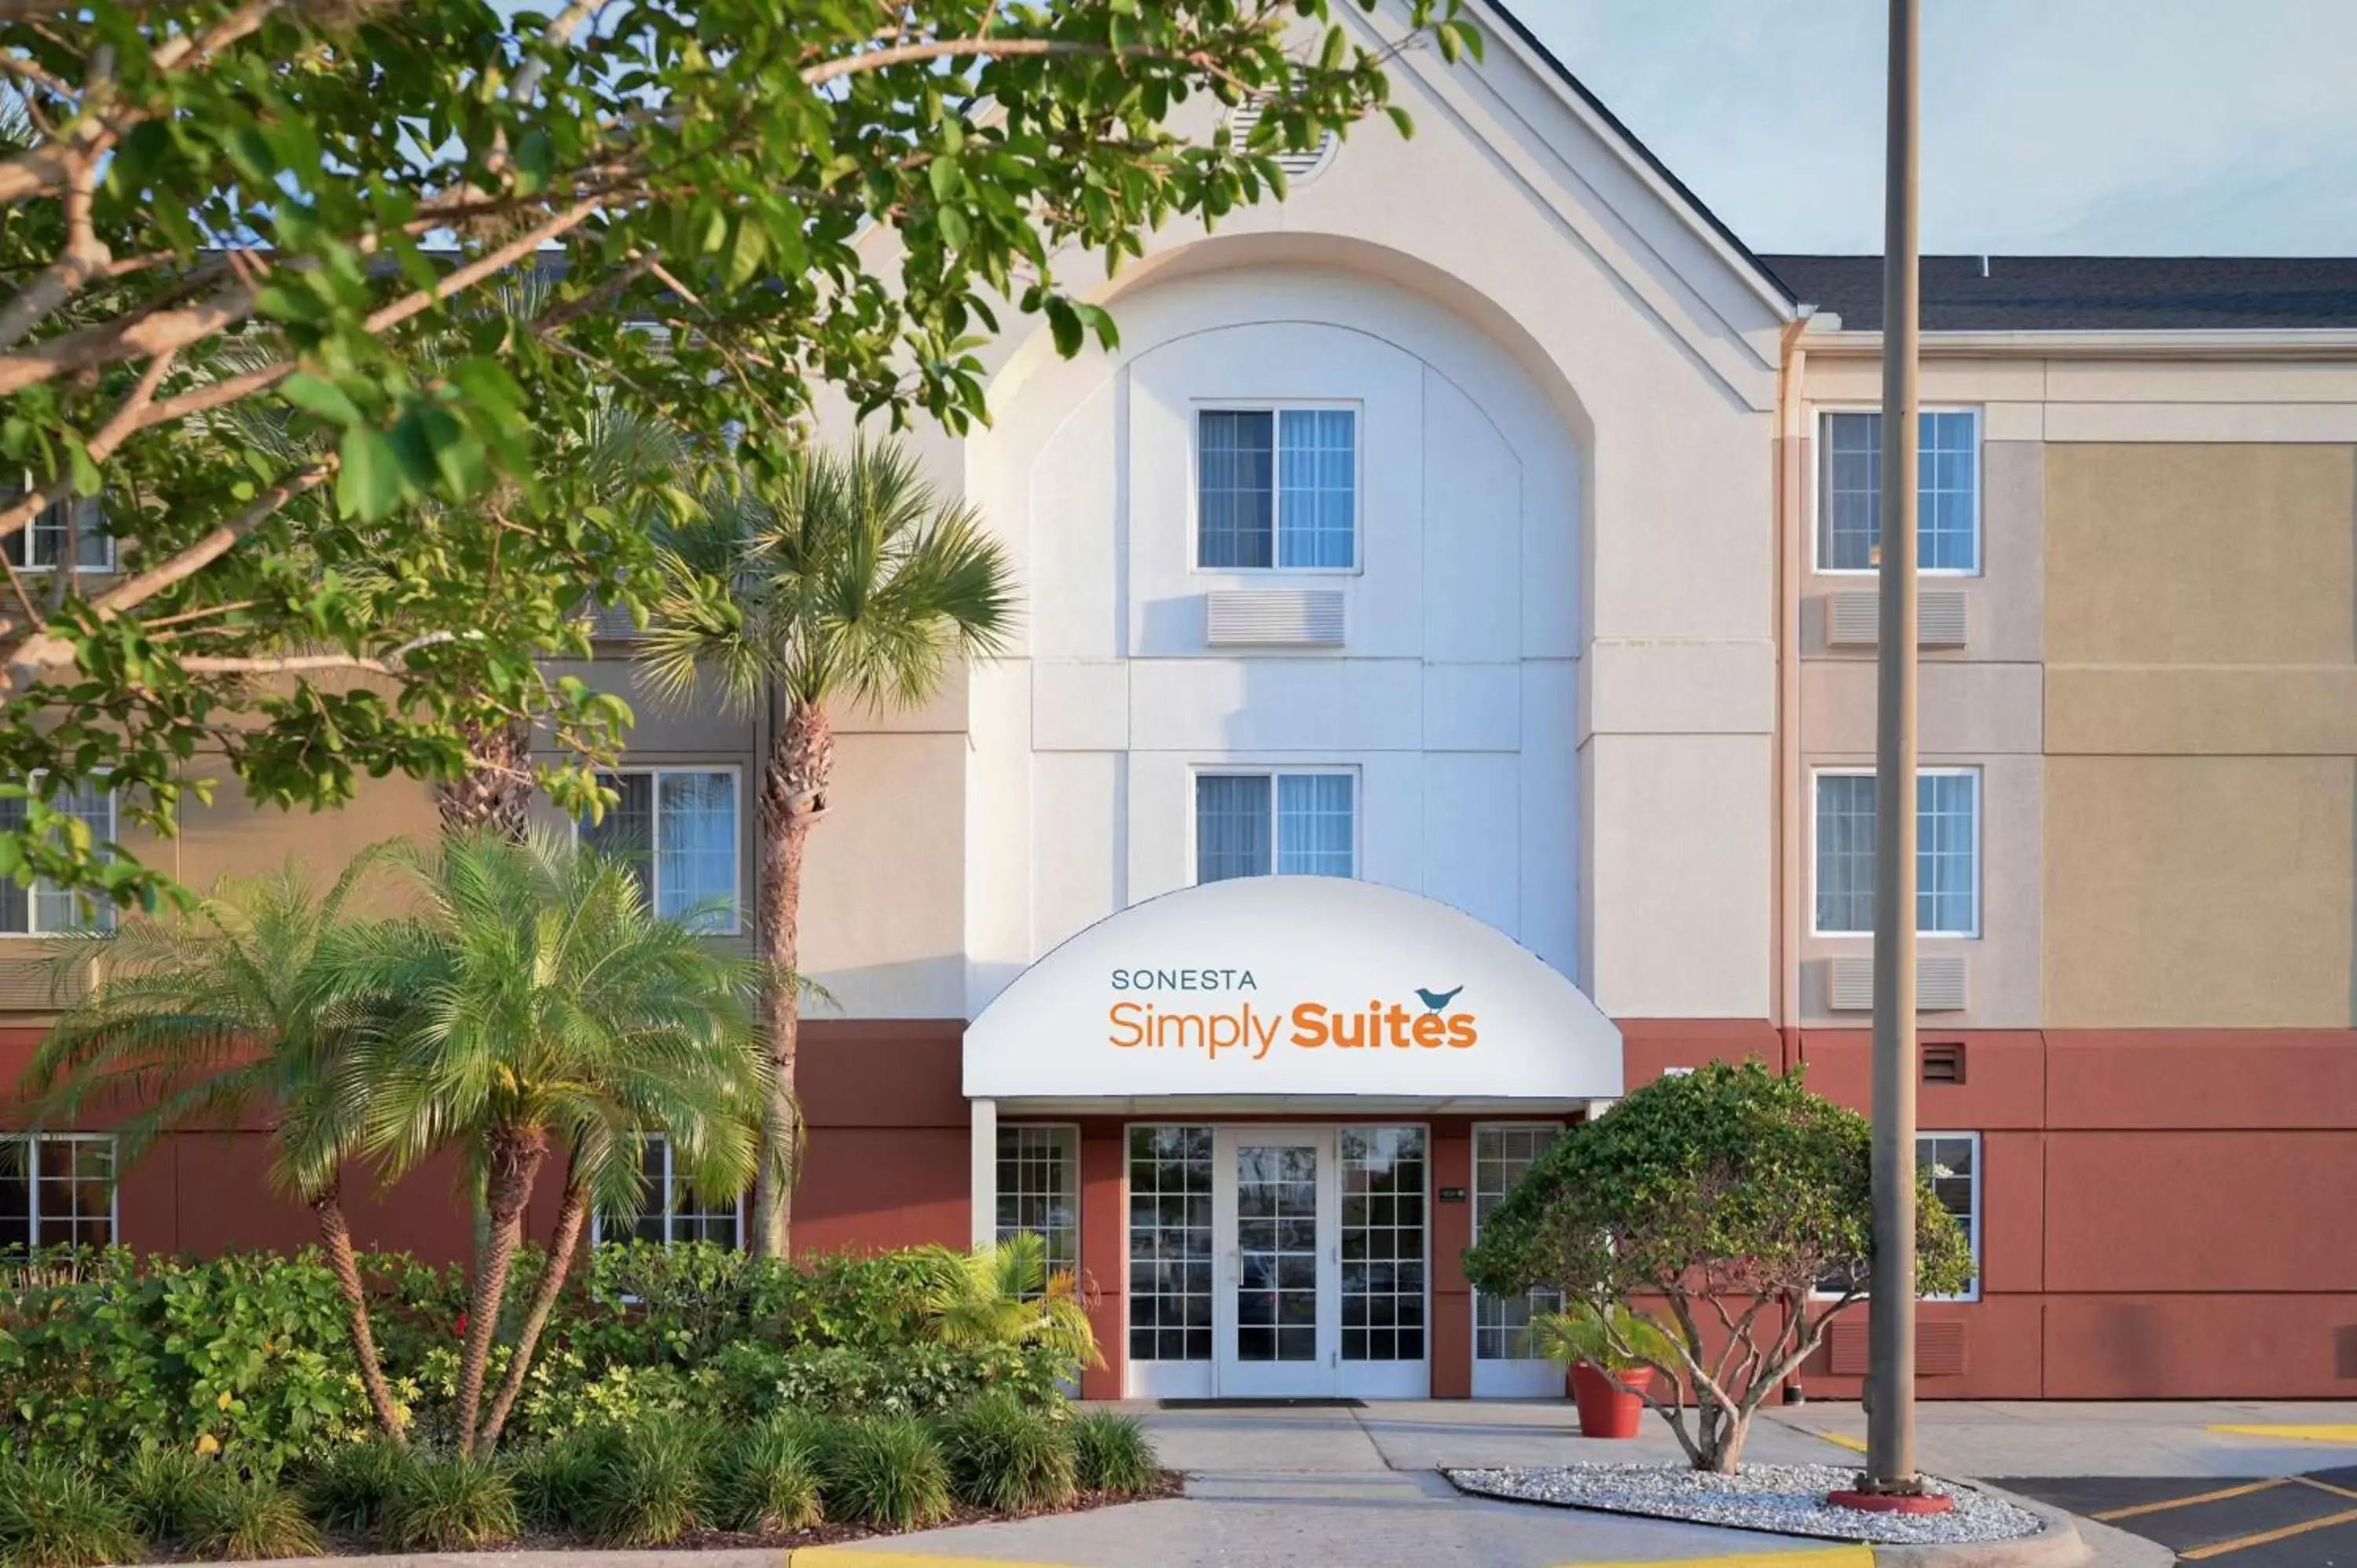 Property building in Sonesta Simply Suites Clearwater